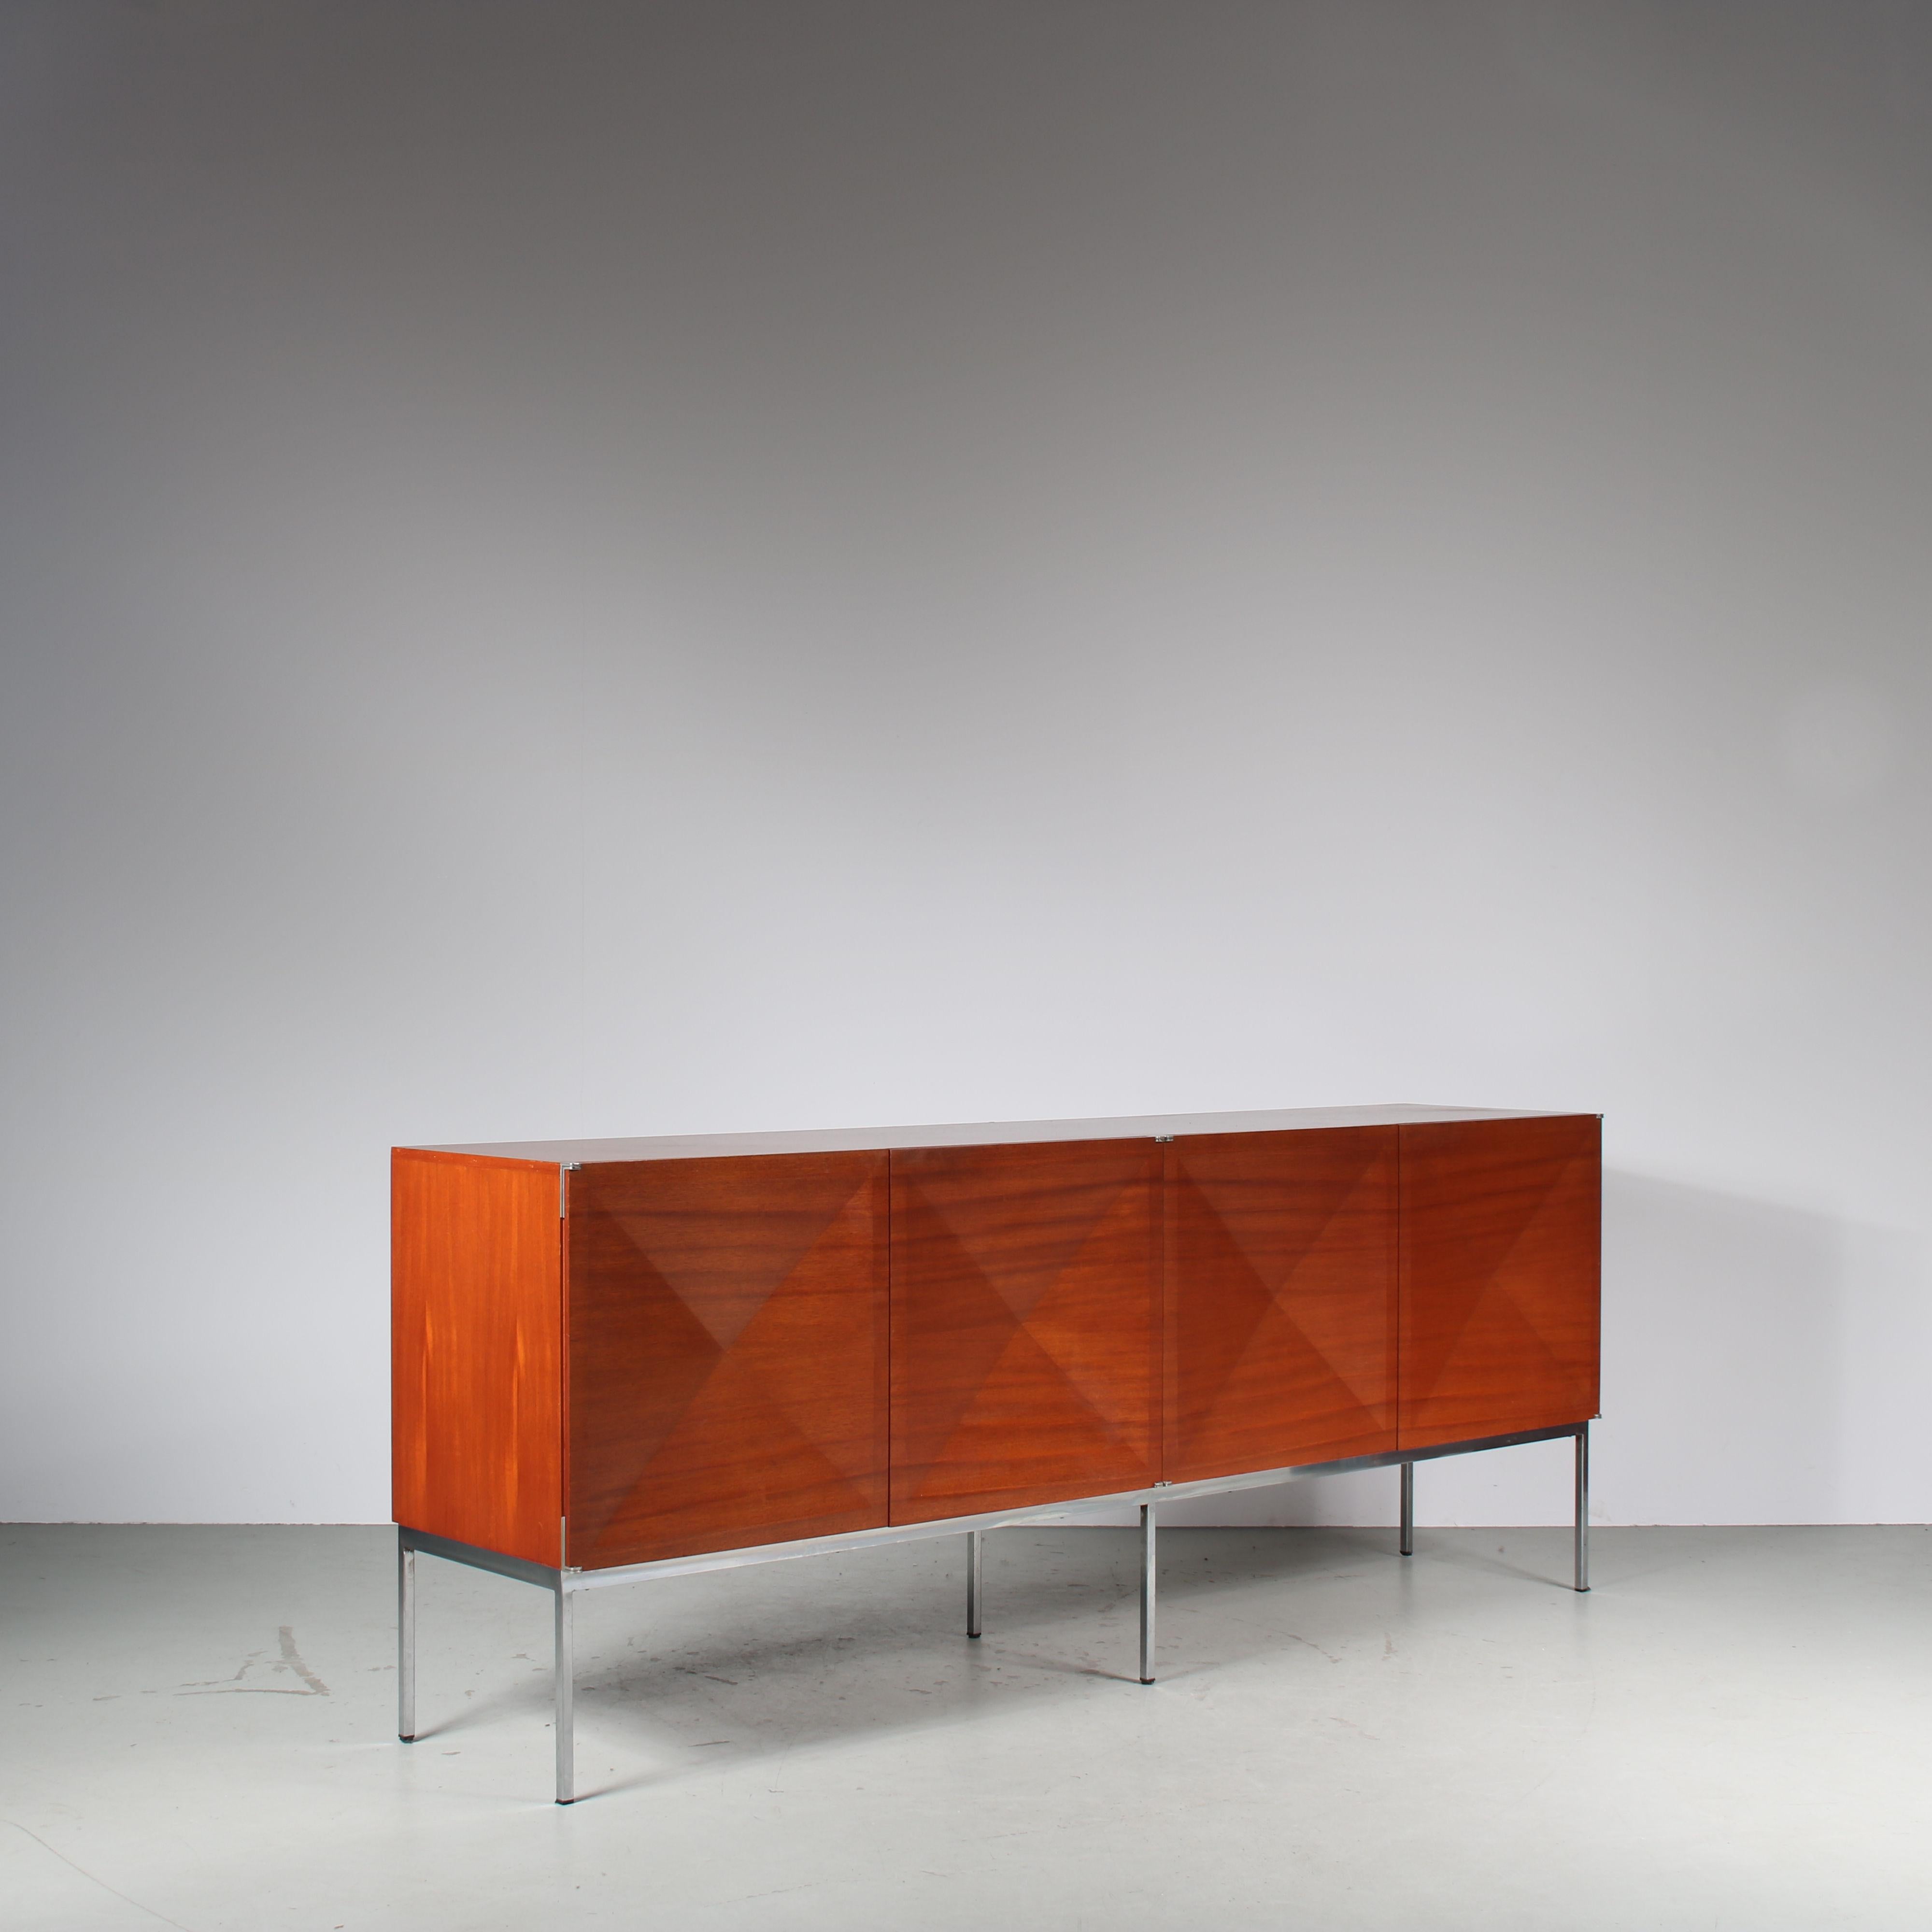 A stunning ‘Pointe de Diamant’ sideboard designed by Antoine Philippon & Jacqueline Lecoq manufactured by Behr in Germany around 1960.

This impressive sideboard is a fantastic find that owes it’s appeal to it’s modern design, eye for detail and